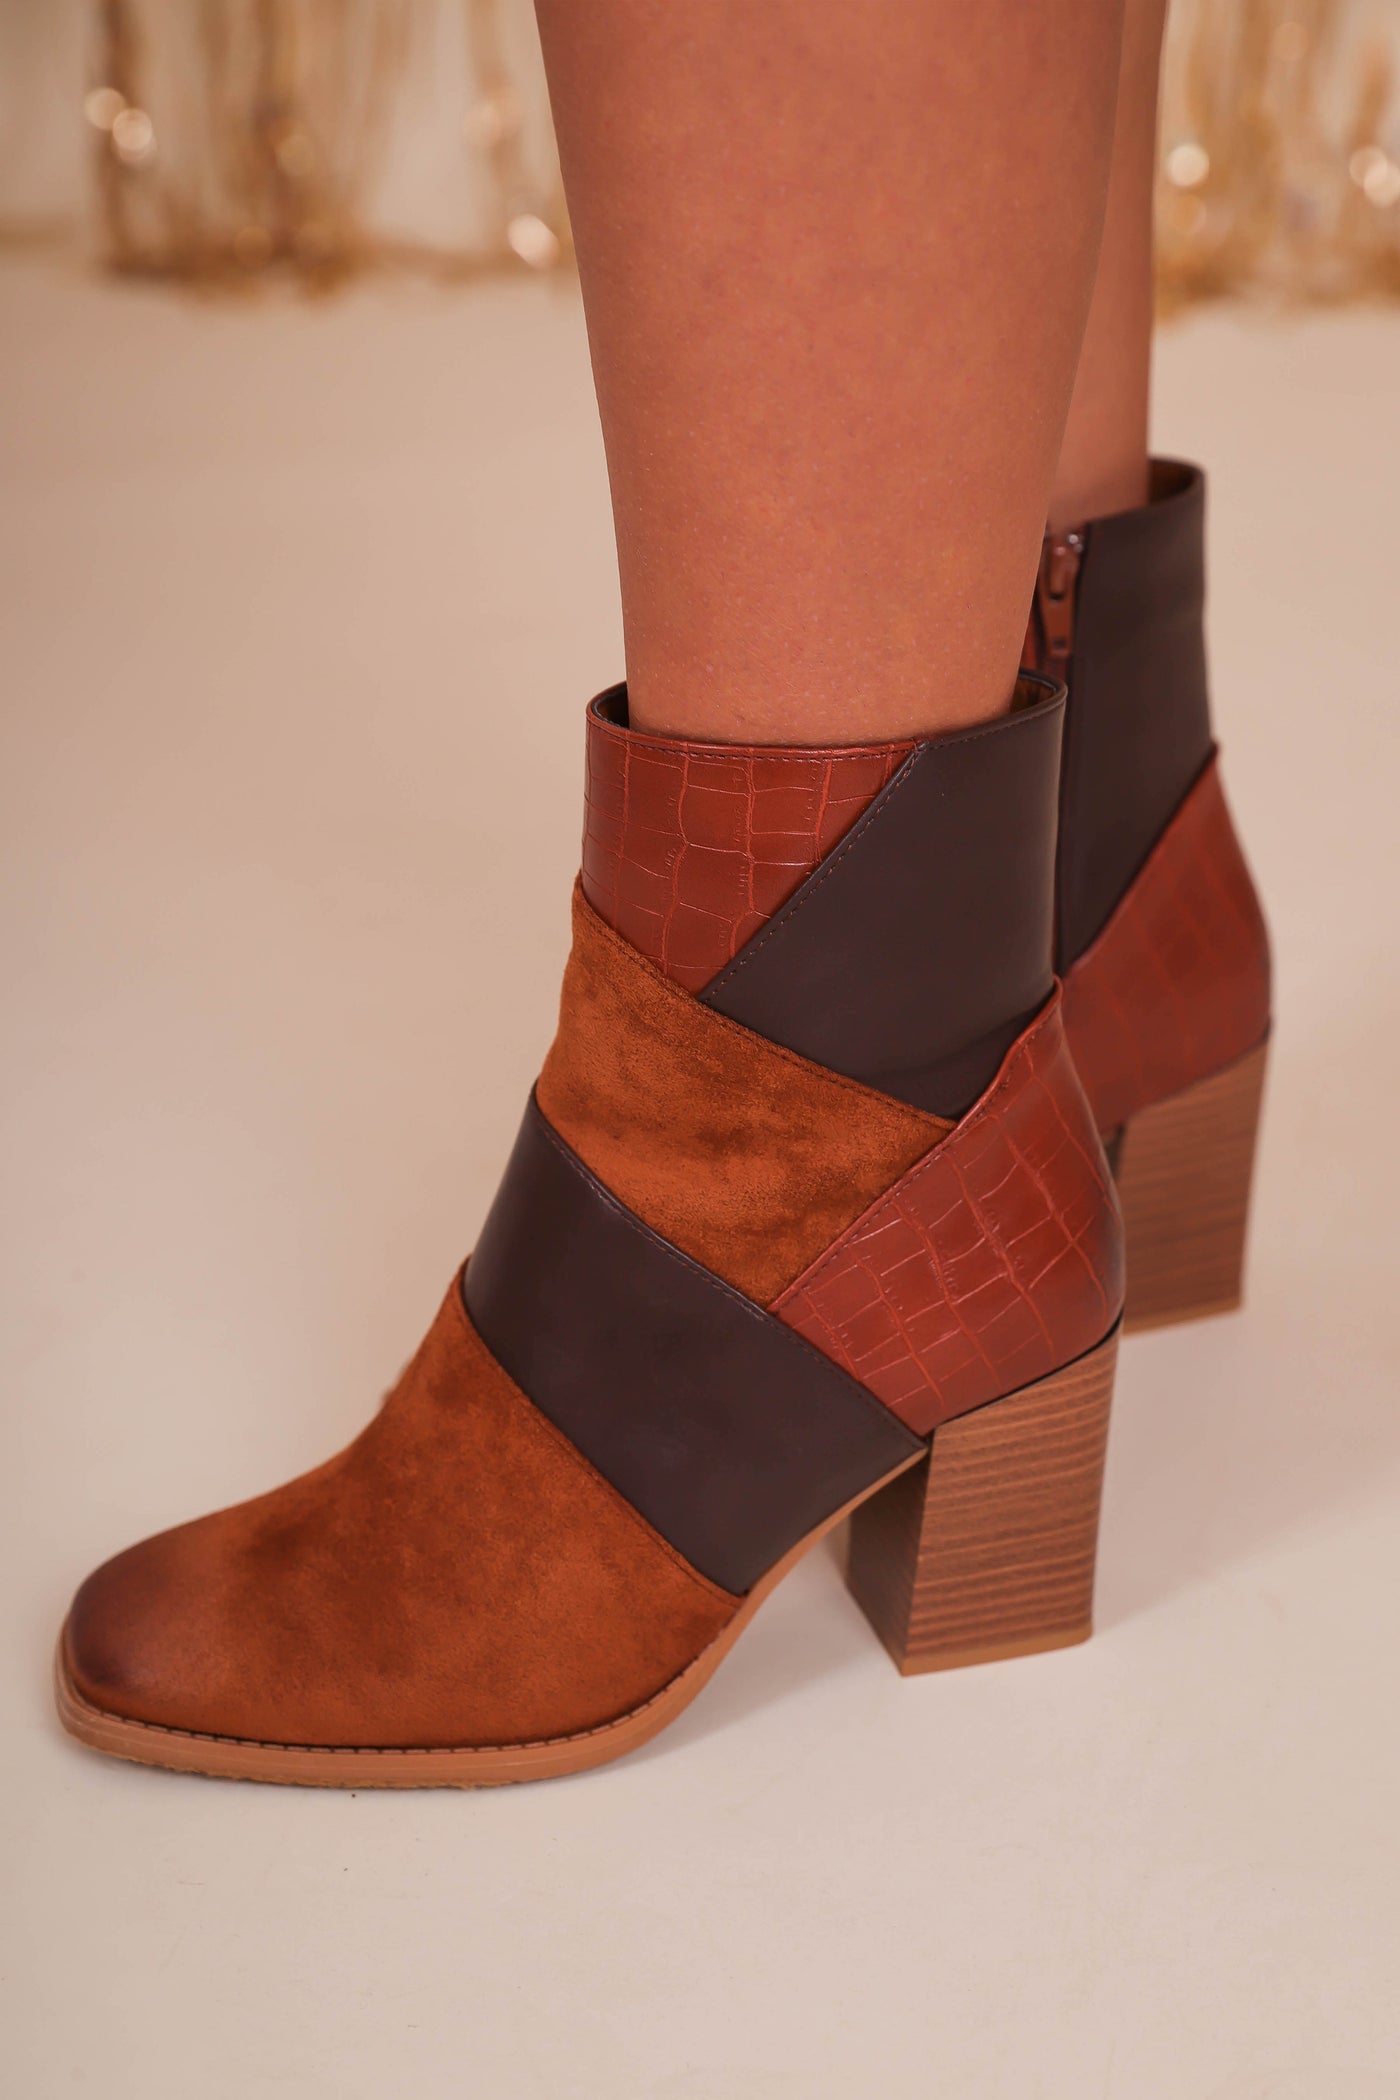 Women's Trendy Ankle Boots- Women's Fall Booties- Patchwork Boots- Pierre Dumas Booties